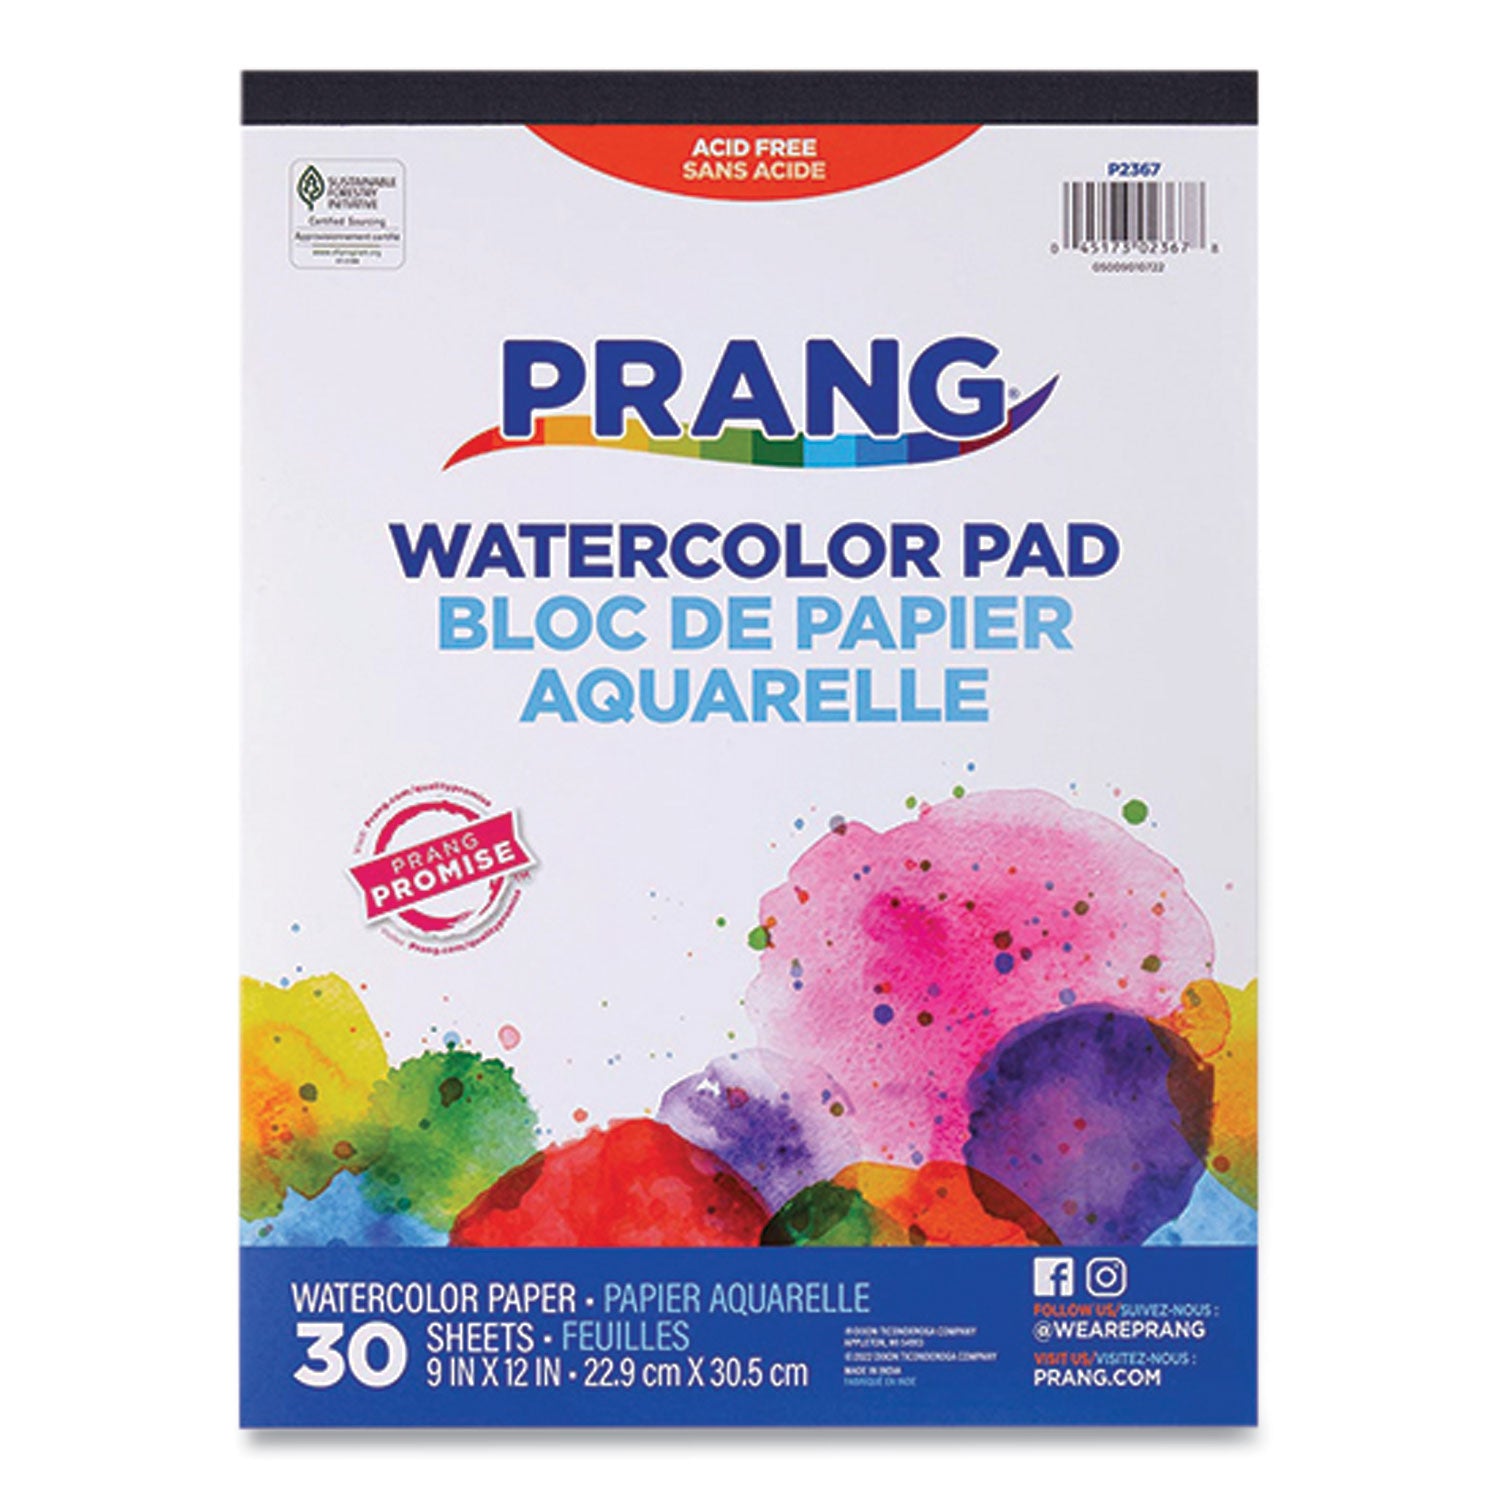 prang-watercolor-paper-pad-unruled-white-multicolor-cover-30-white-9-x-12-sheets_dixp2367 - 1